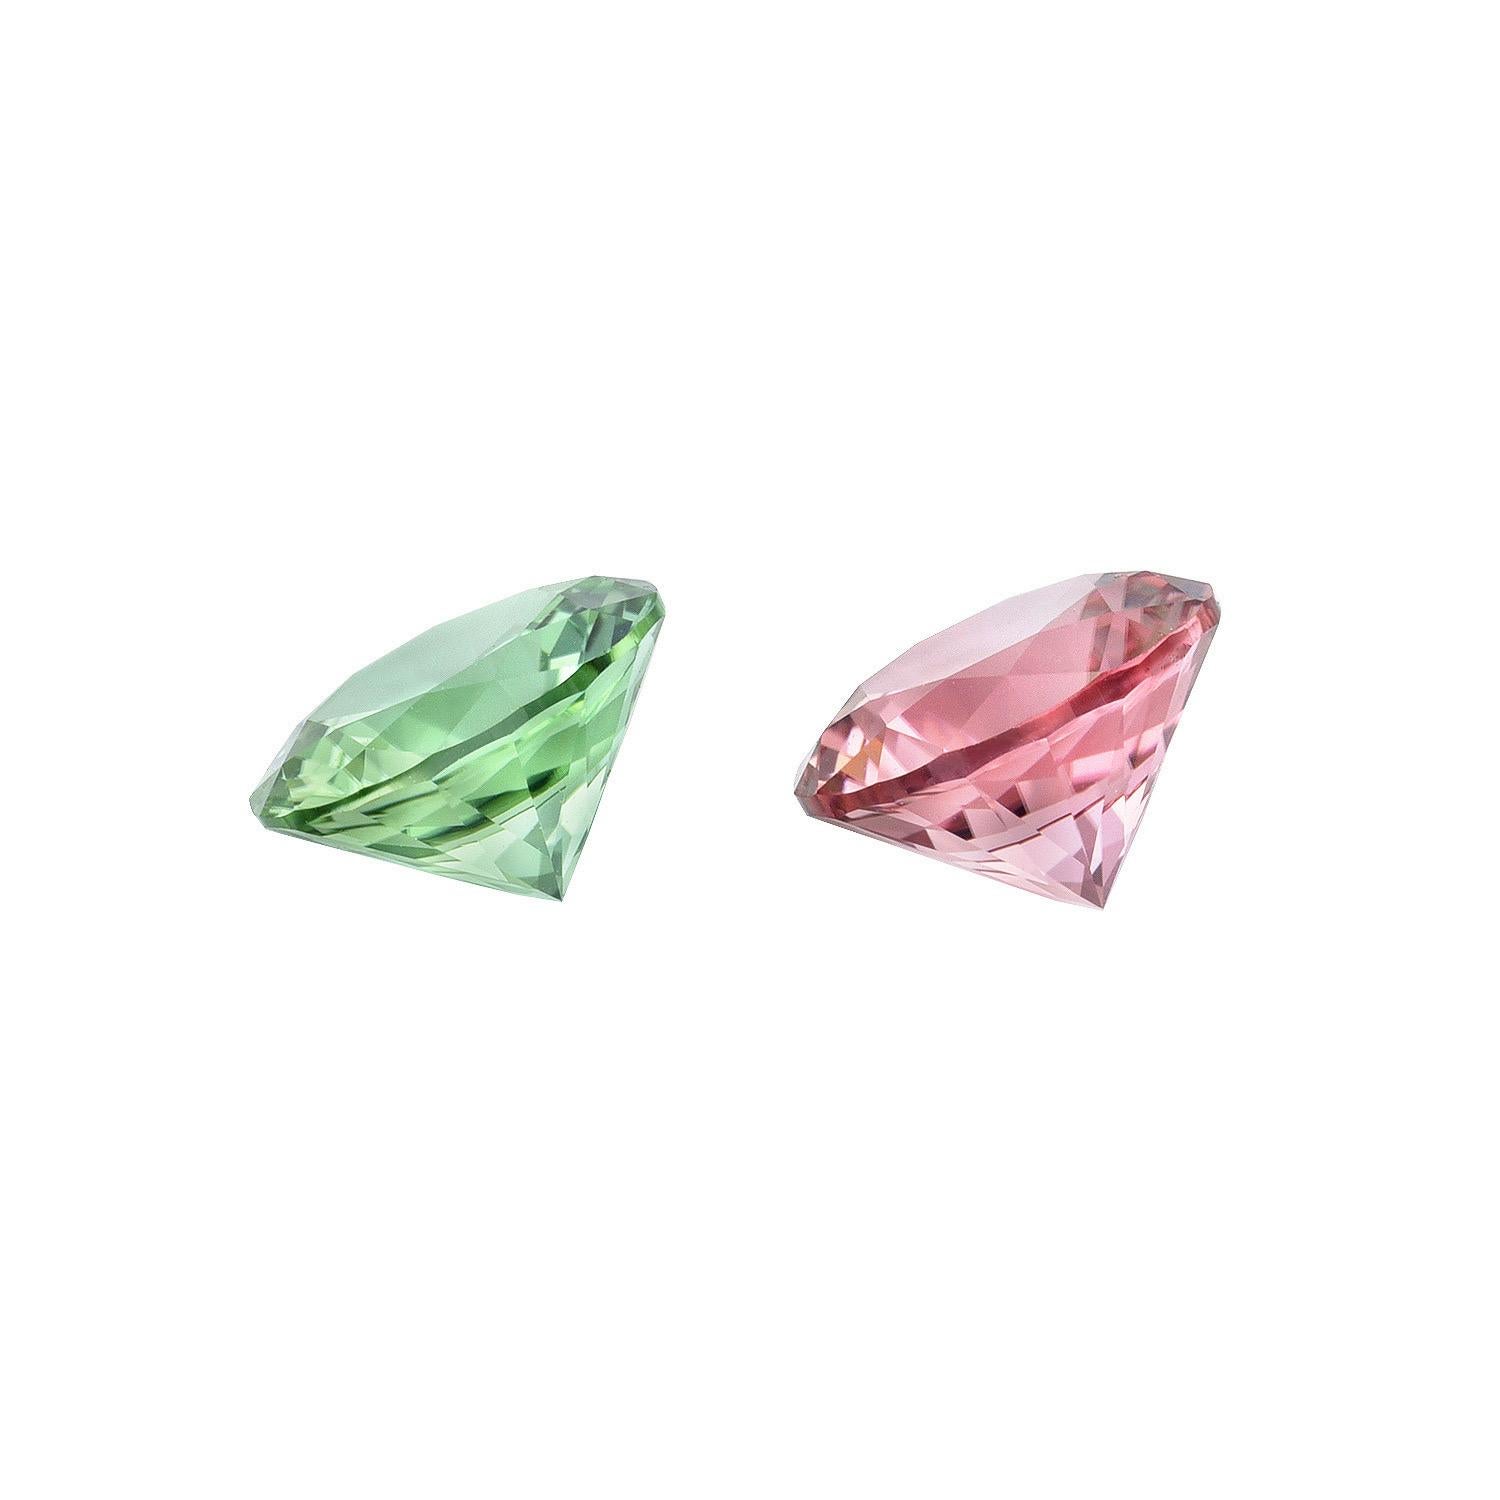 Perfectly mismatched pair of Pink and Green Tourmaline unmounted round gemstones, weighing a total of 1.44 carats. 
Dimensions: 6mm.
Returns are accepted and paid by us within 7 days of delivery.
We offer supreme custom jewelry work upon request.